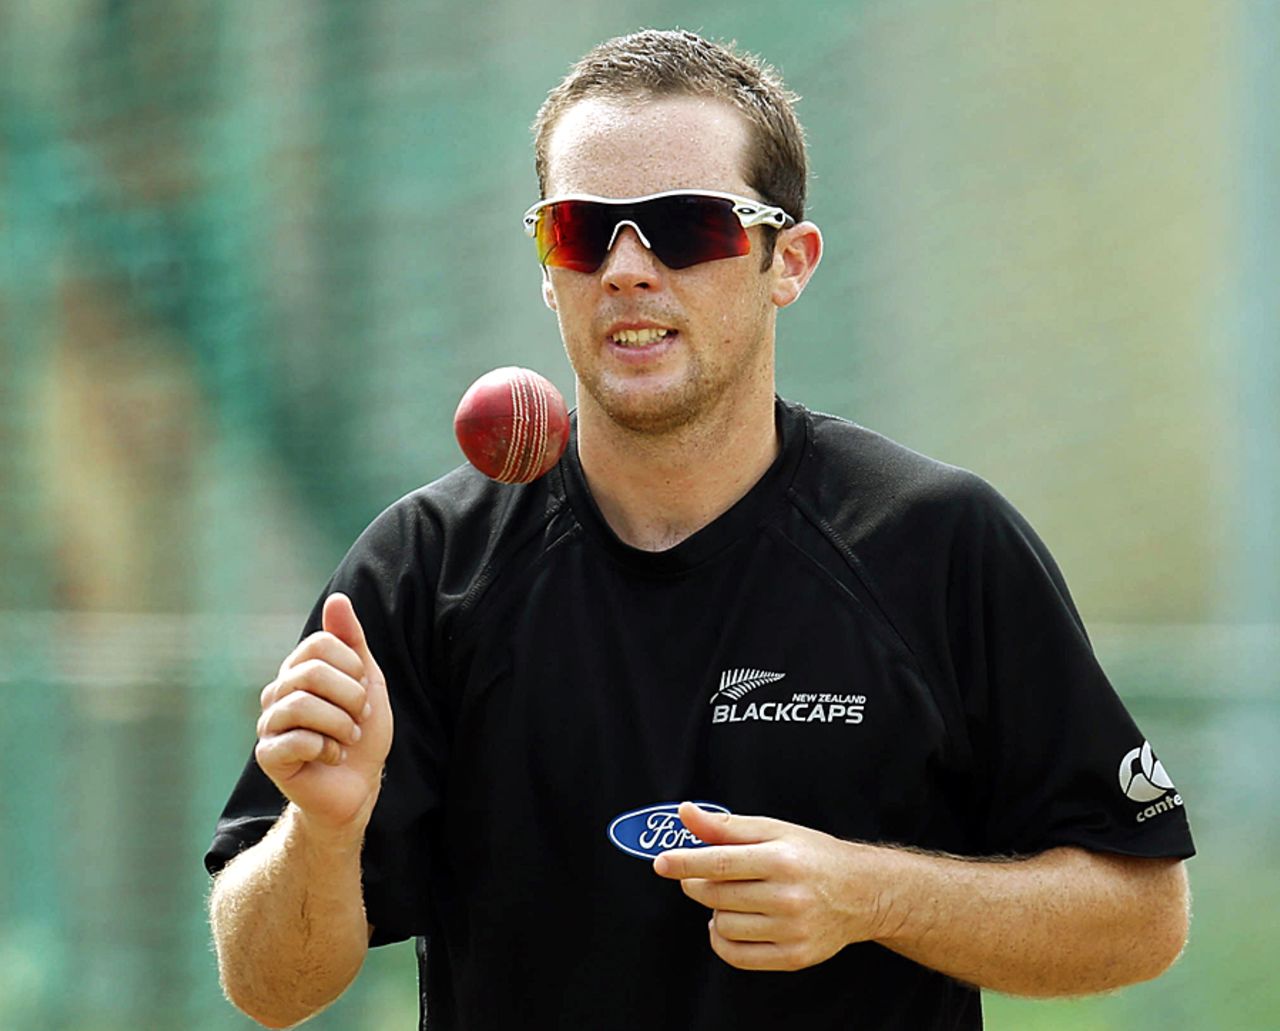 Todd Astle tosses the ball at practice, Colombo, November 23, 2012